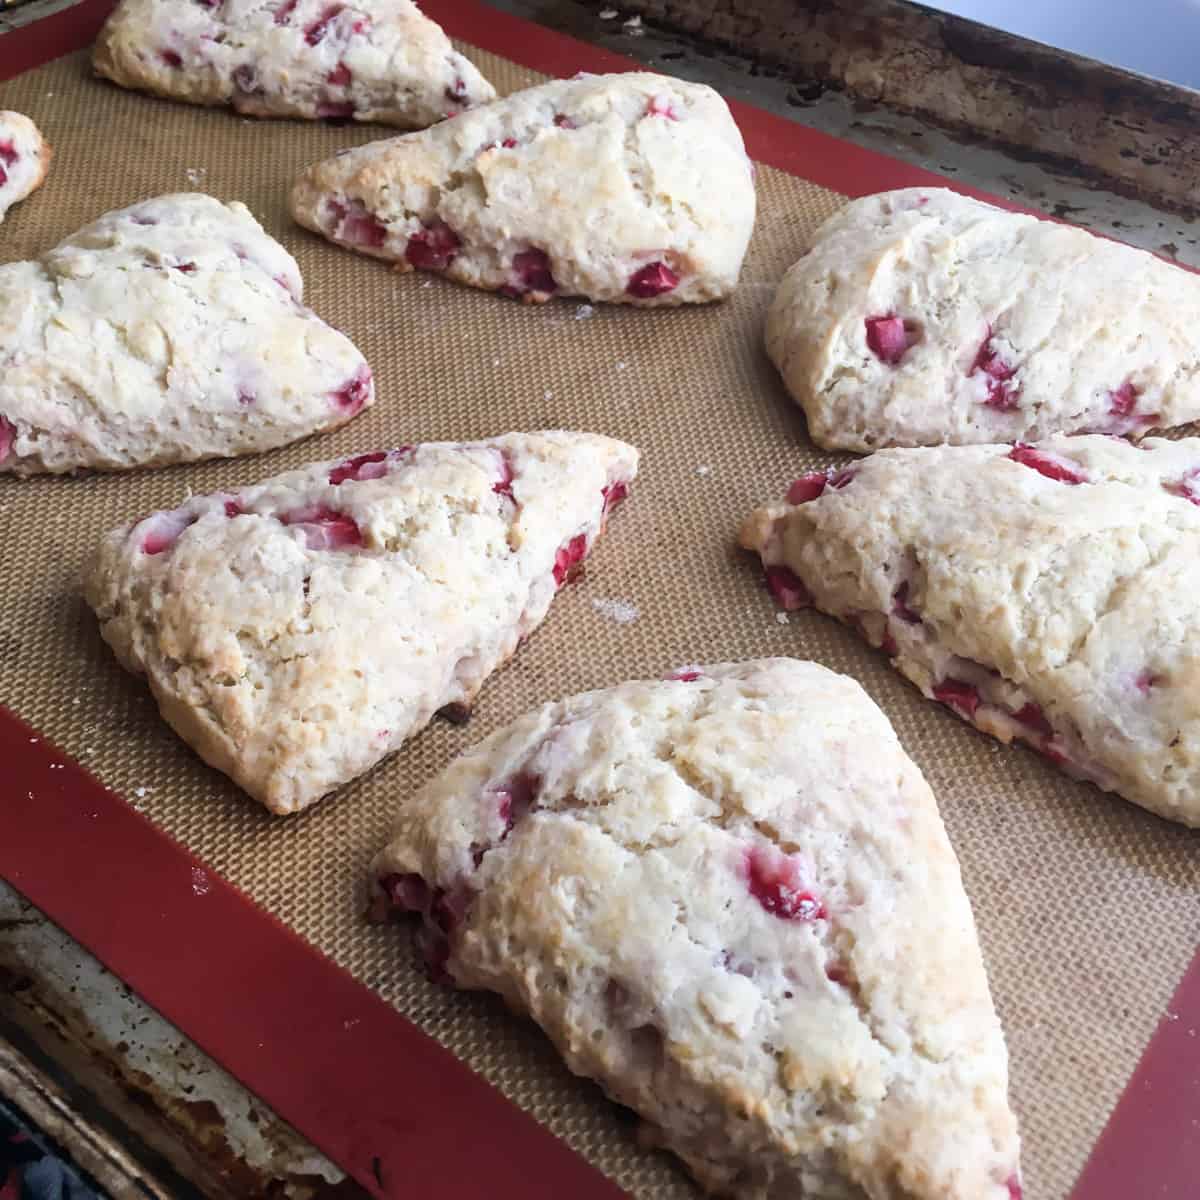 Fresh baked scones out of the oven.